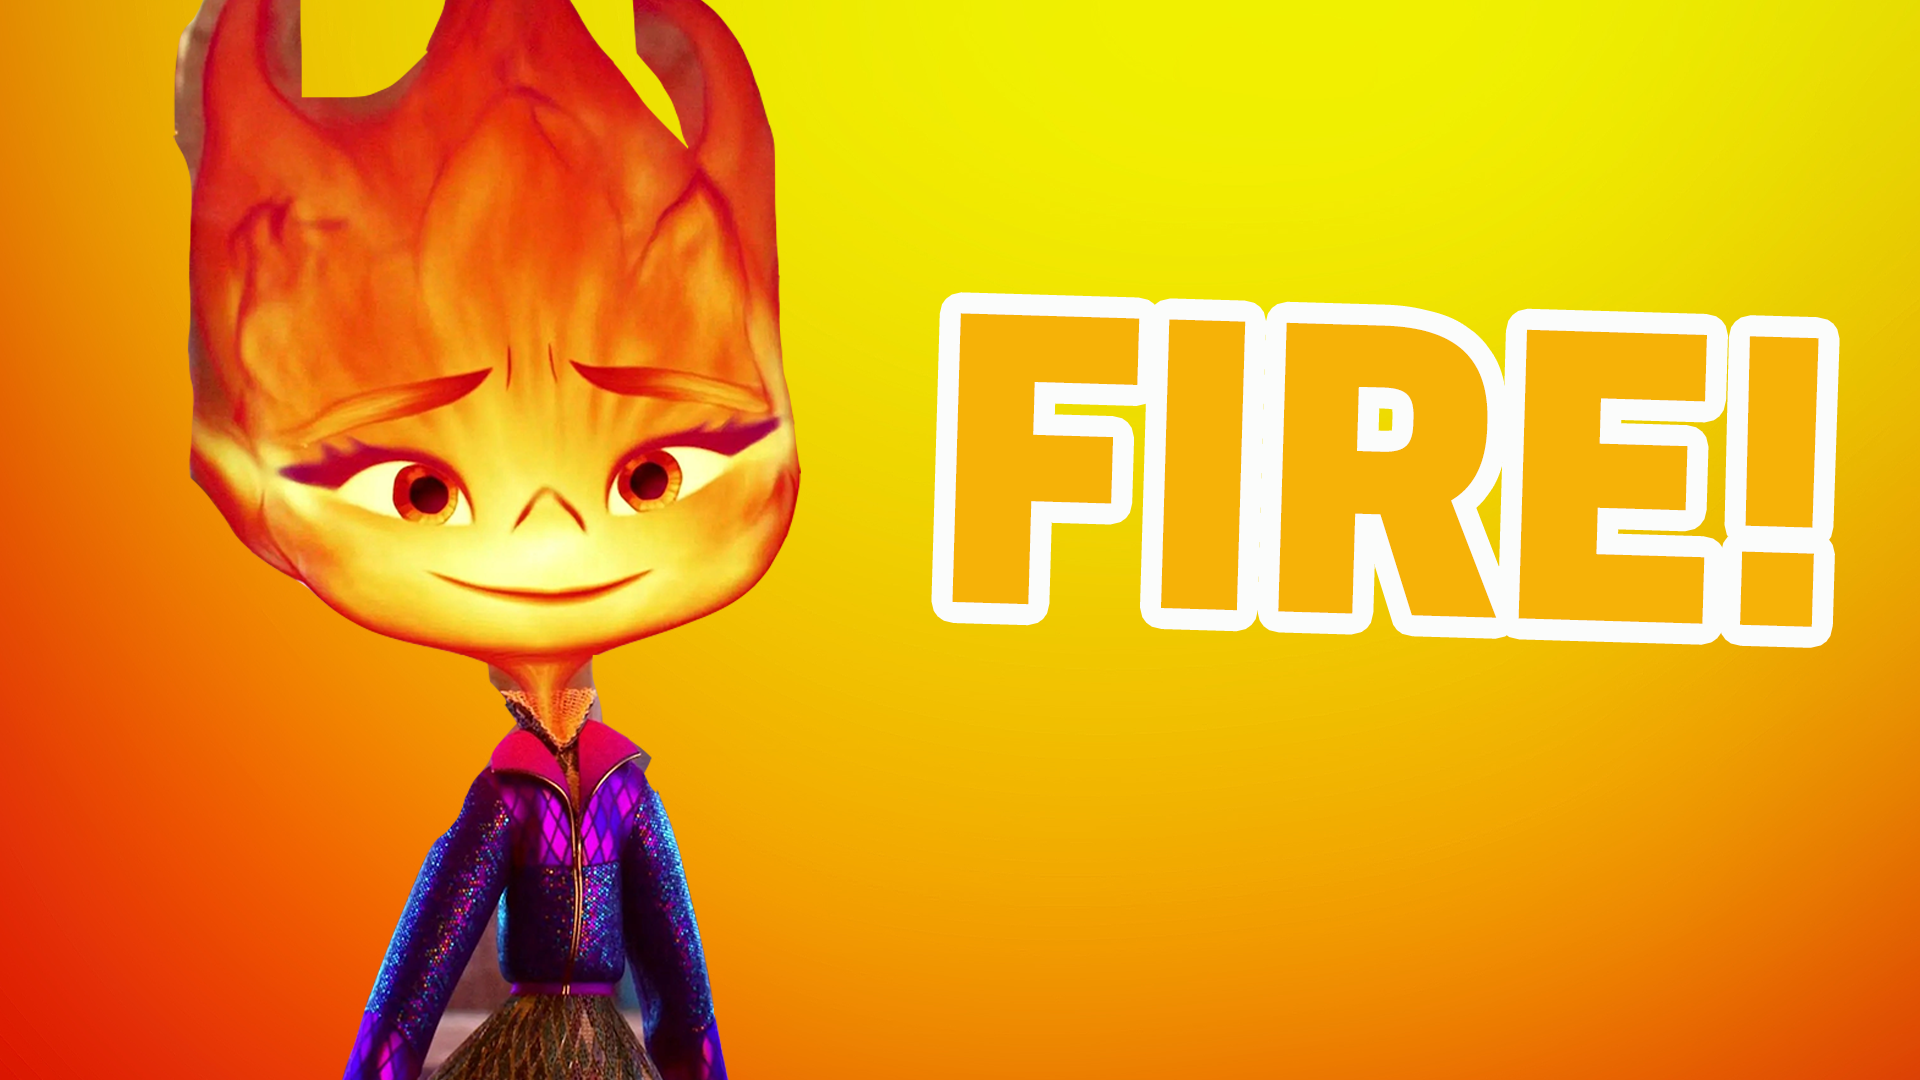 You're fire! You're passionate, strong and you really believe in yourself! Sometimes you can be a little destructive, but you shine bright and light up people's lives!